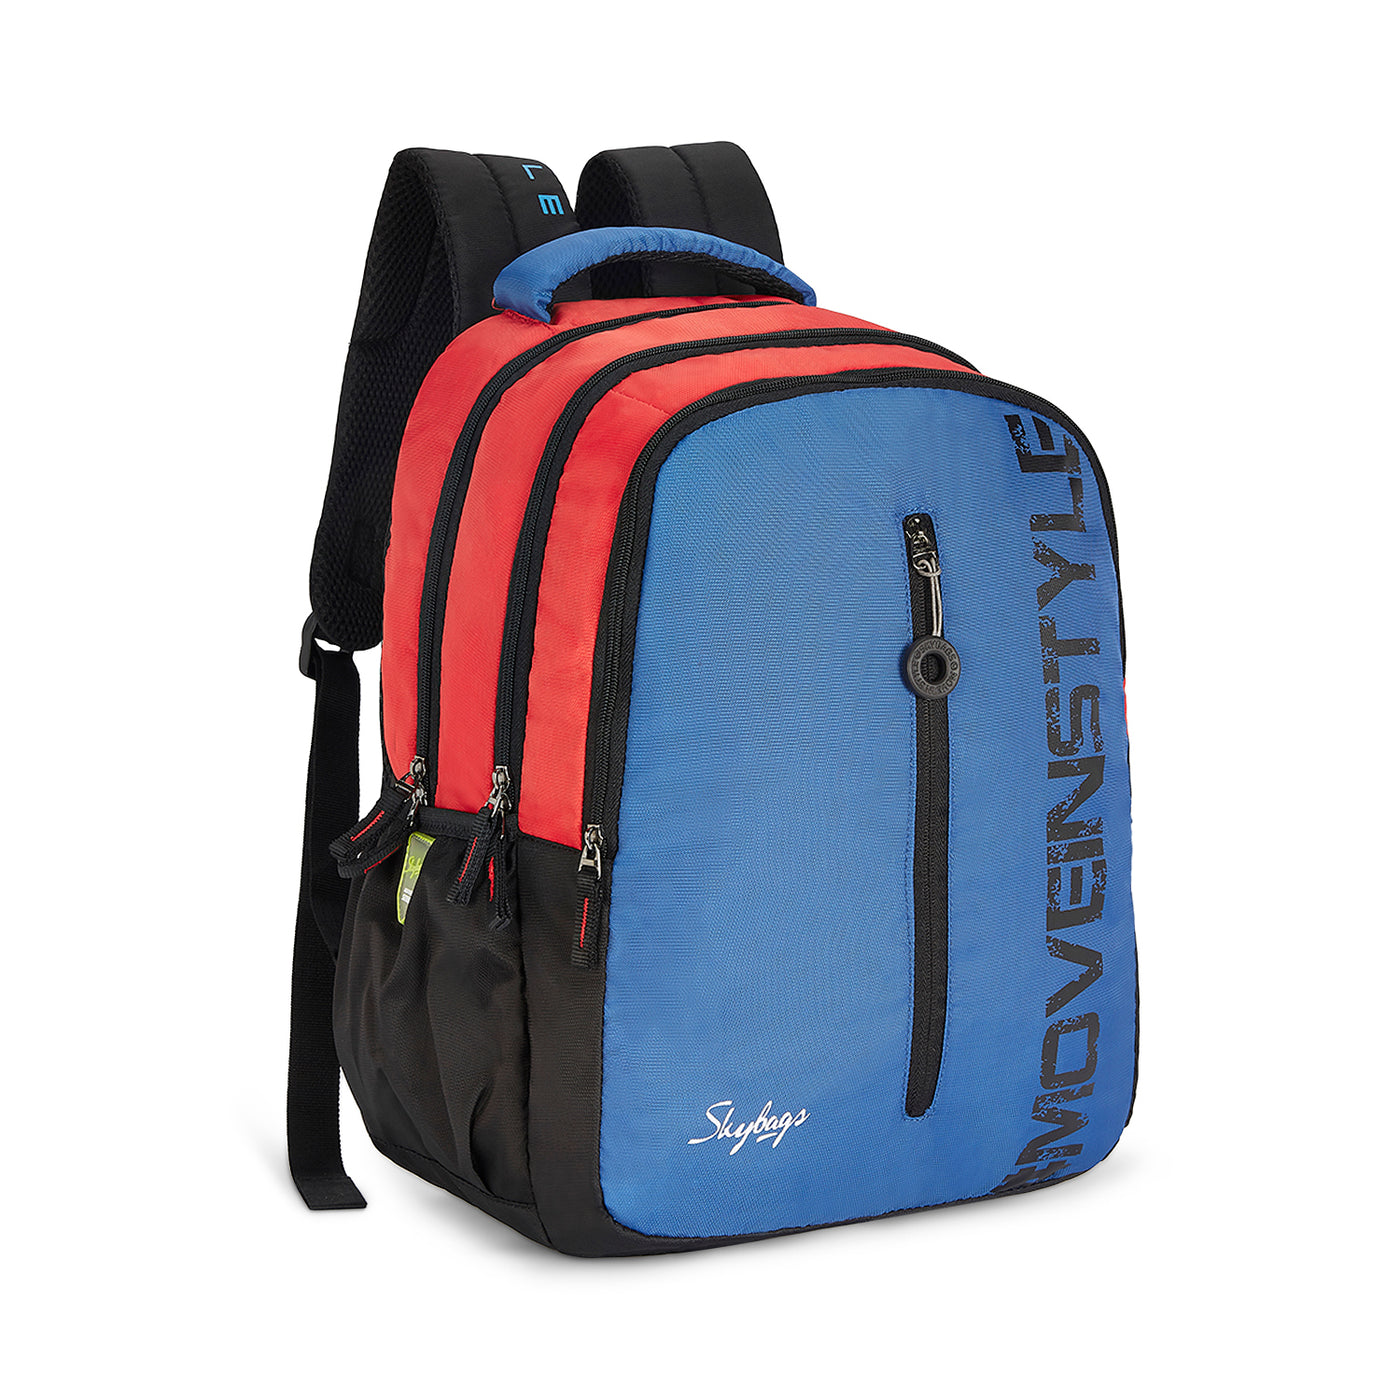 Skybags New Neon 22 